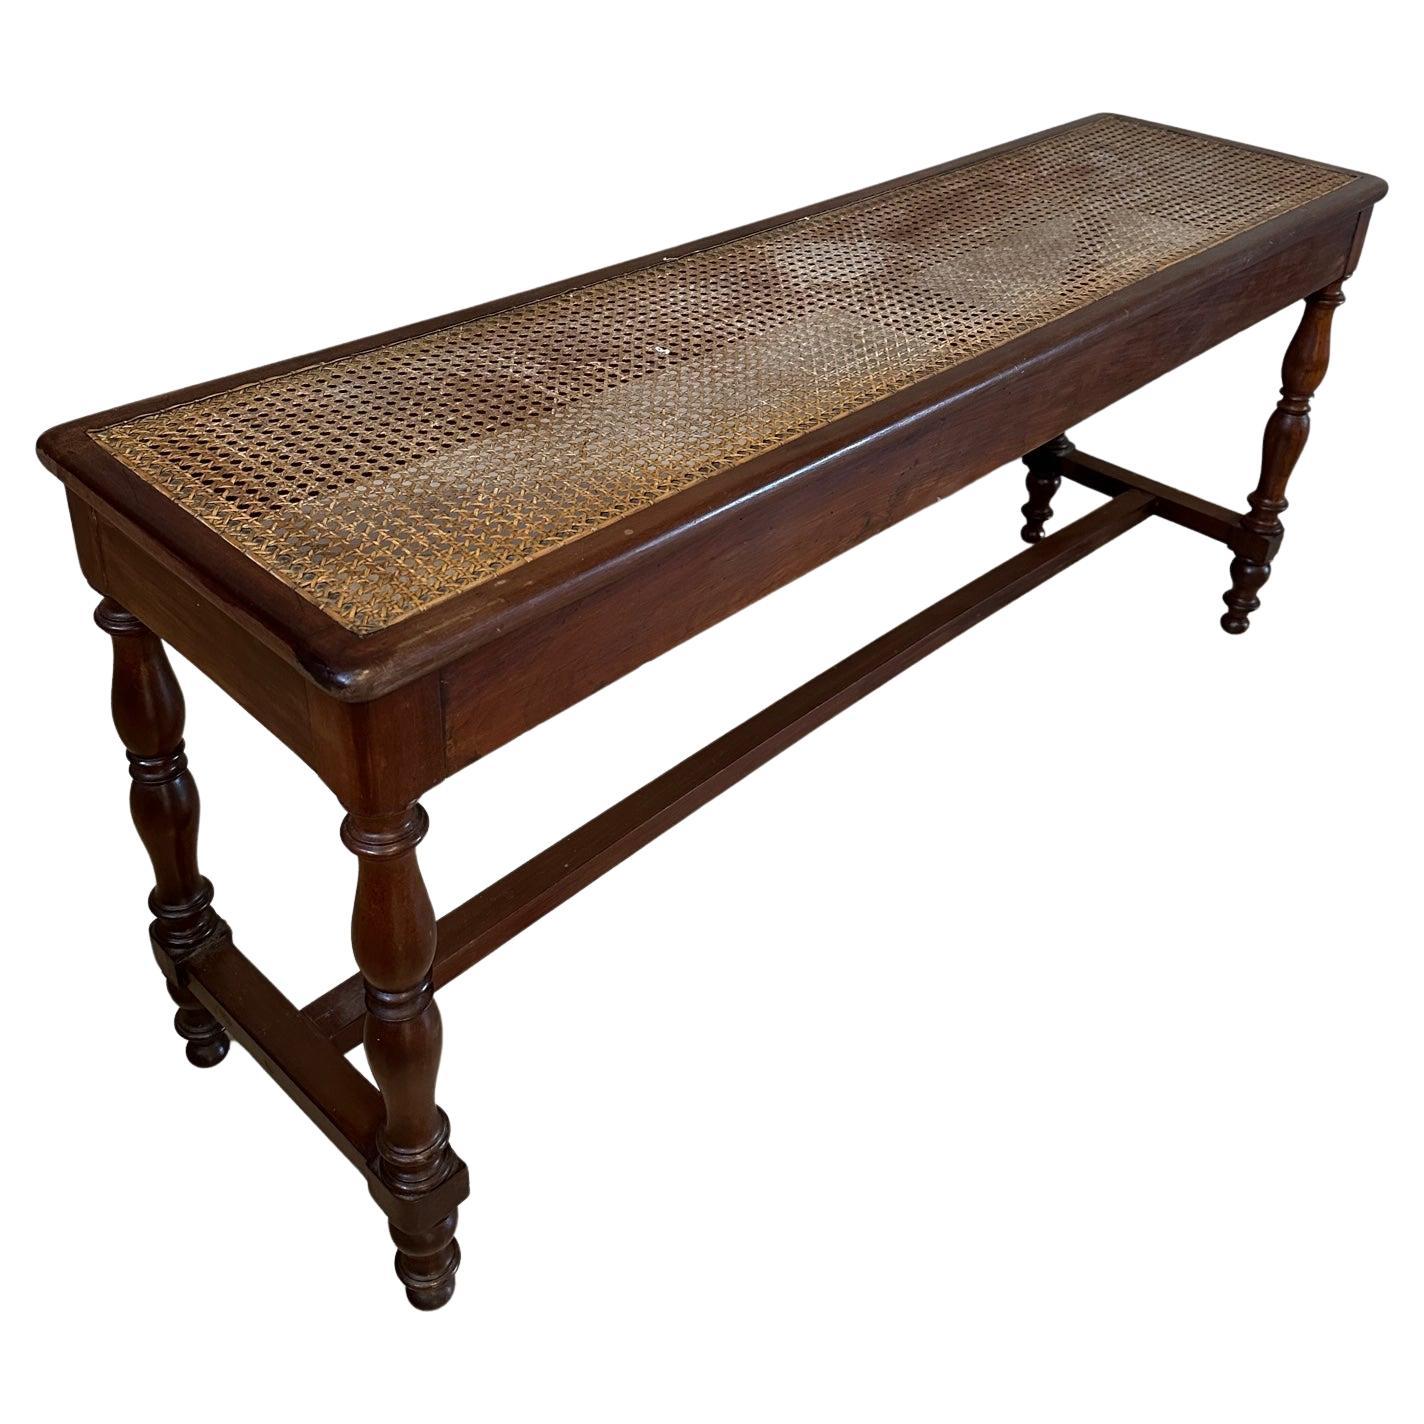 20th century French Walnut and Caned Piano Bench, 1920s